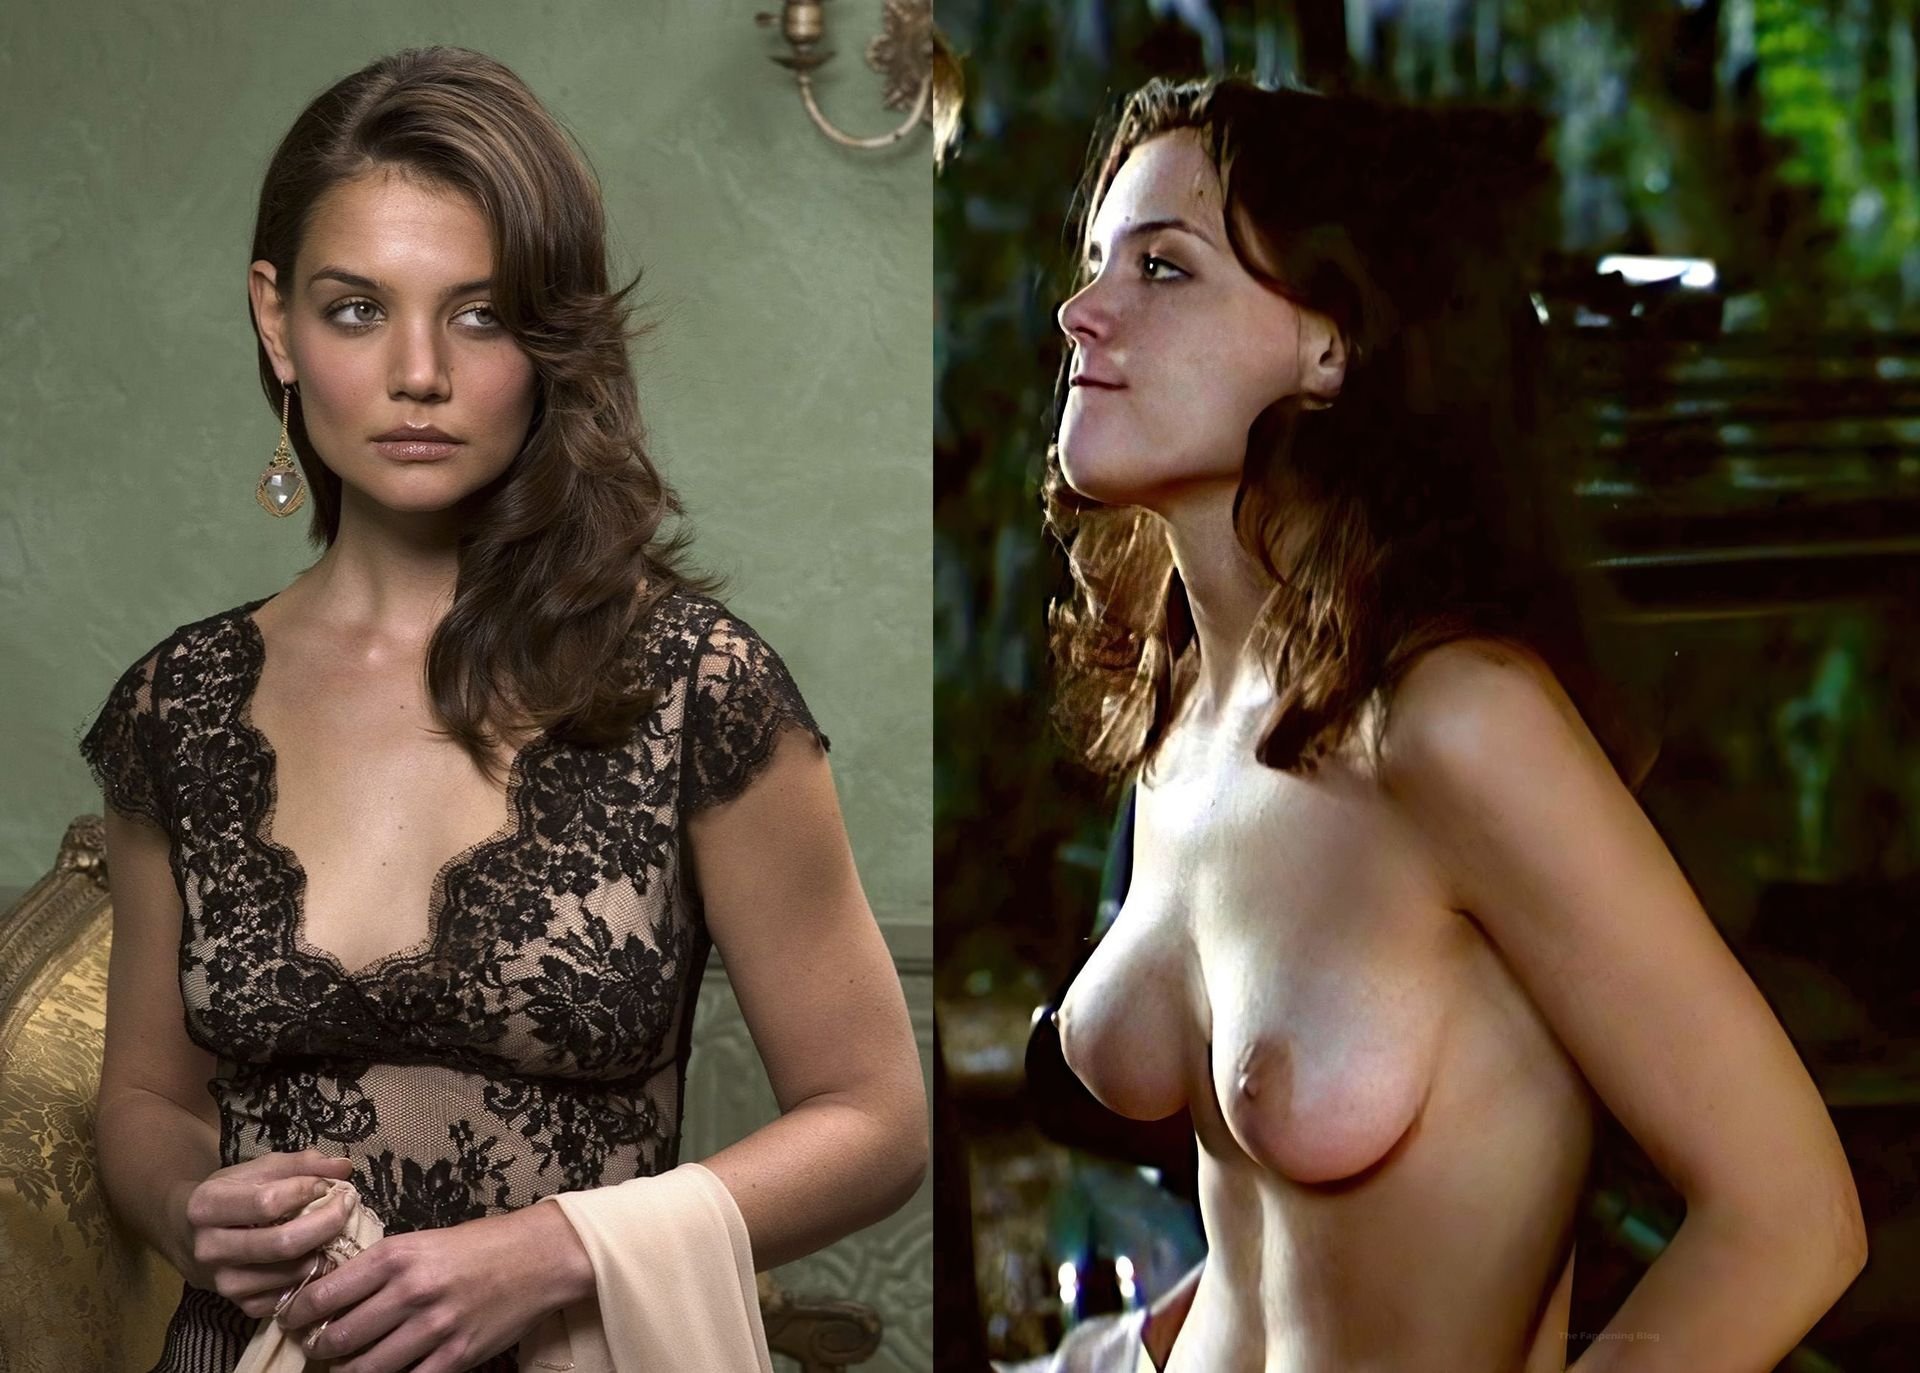 amit fridman recommends katie holmes nude pictures pic